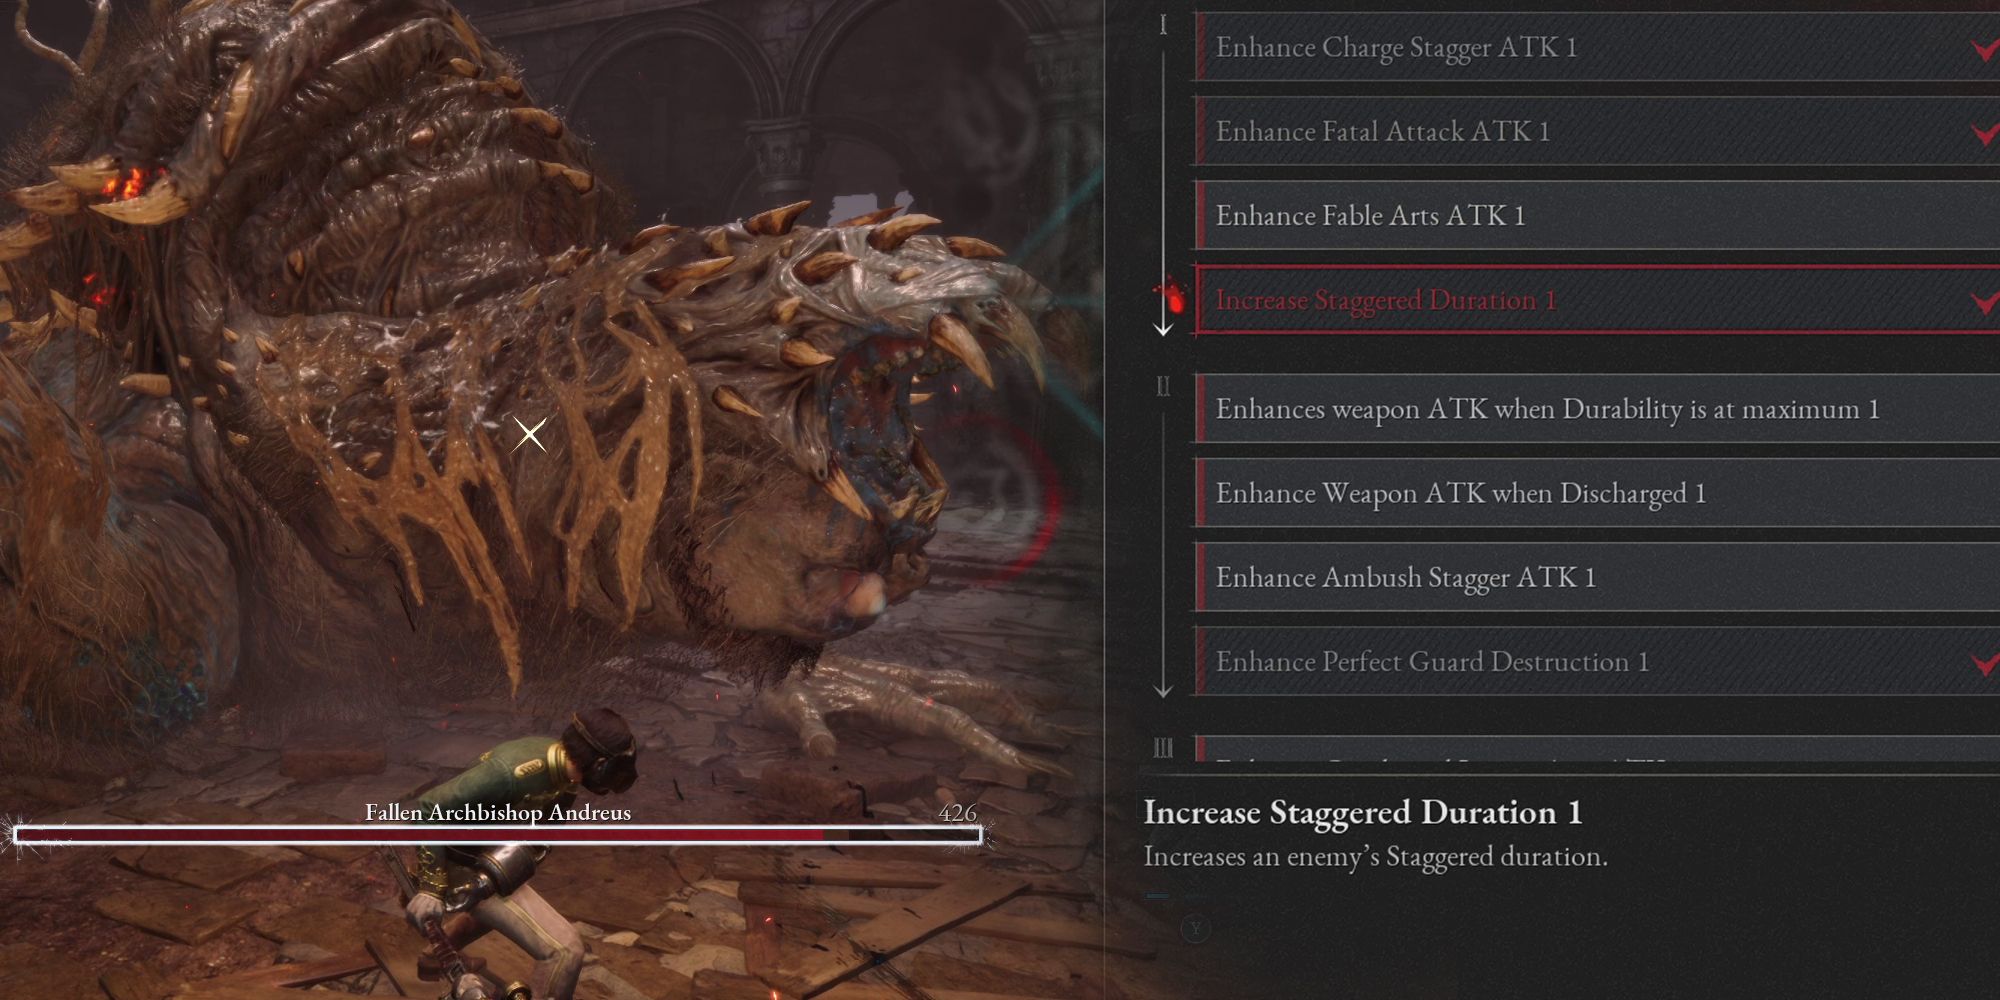 Lies of P - Staggered Duration Ability Increase Next To Image Of Staggerable Boss